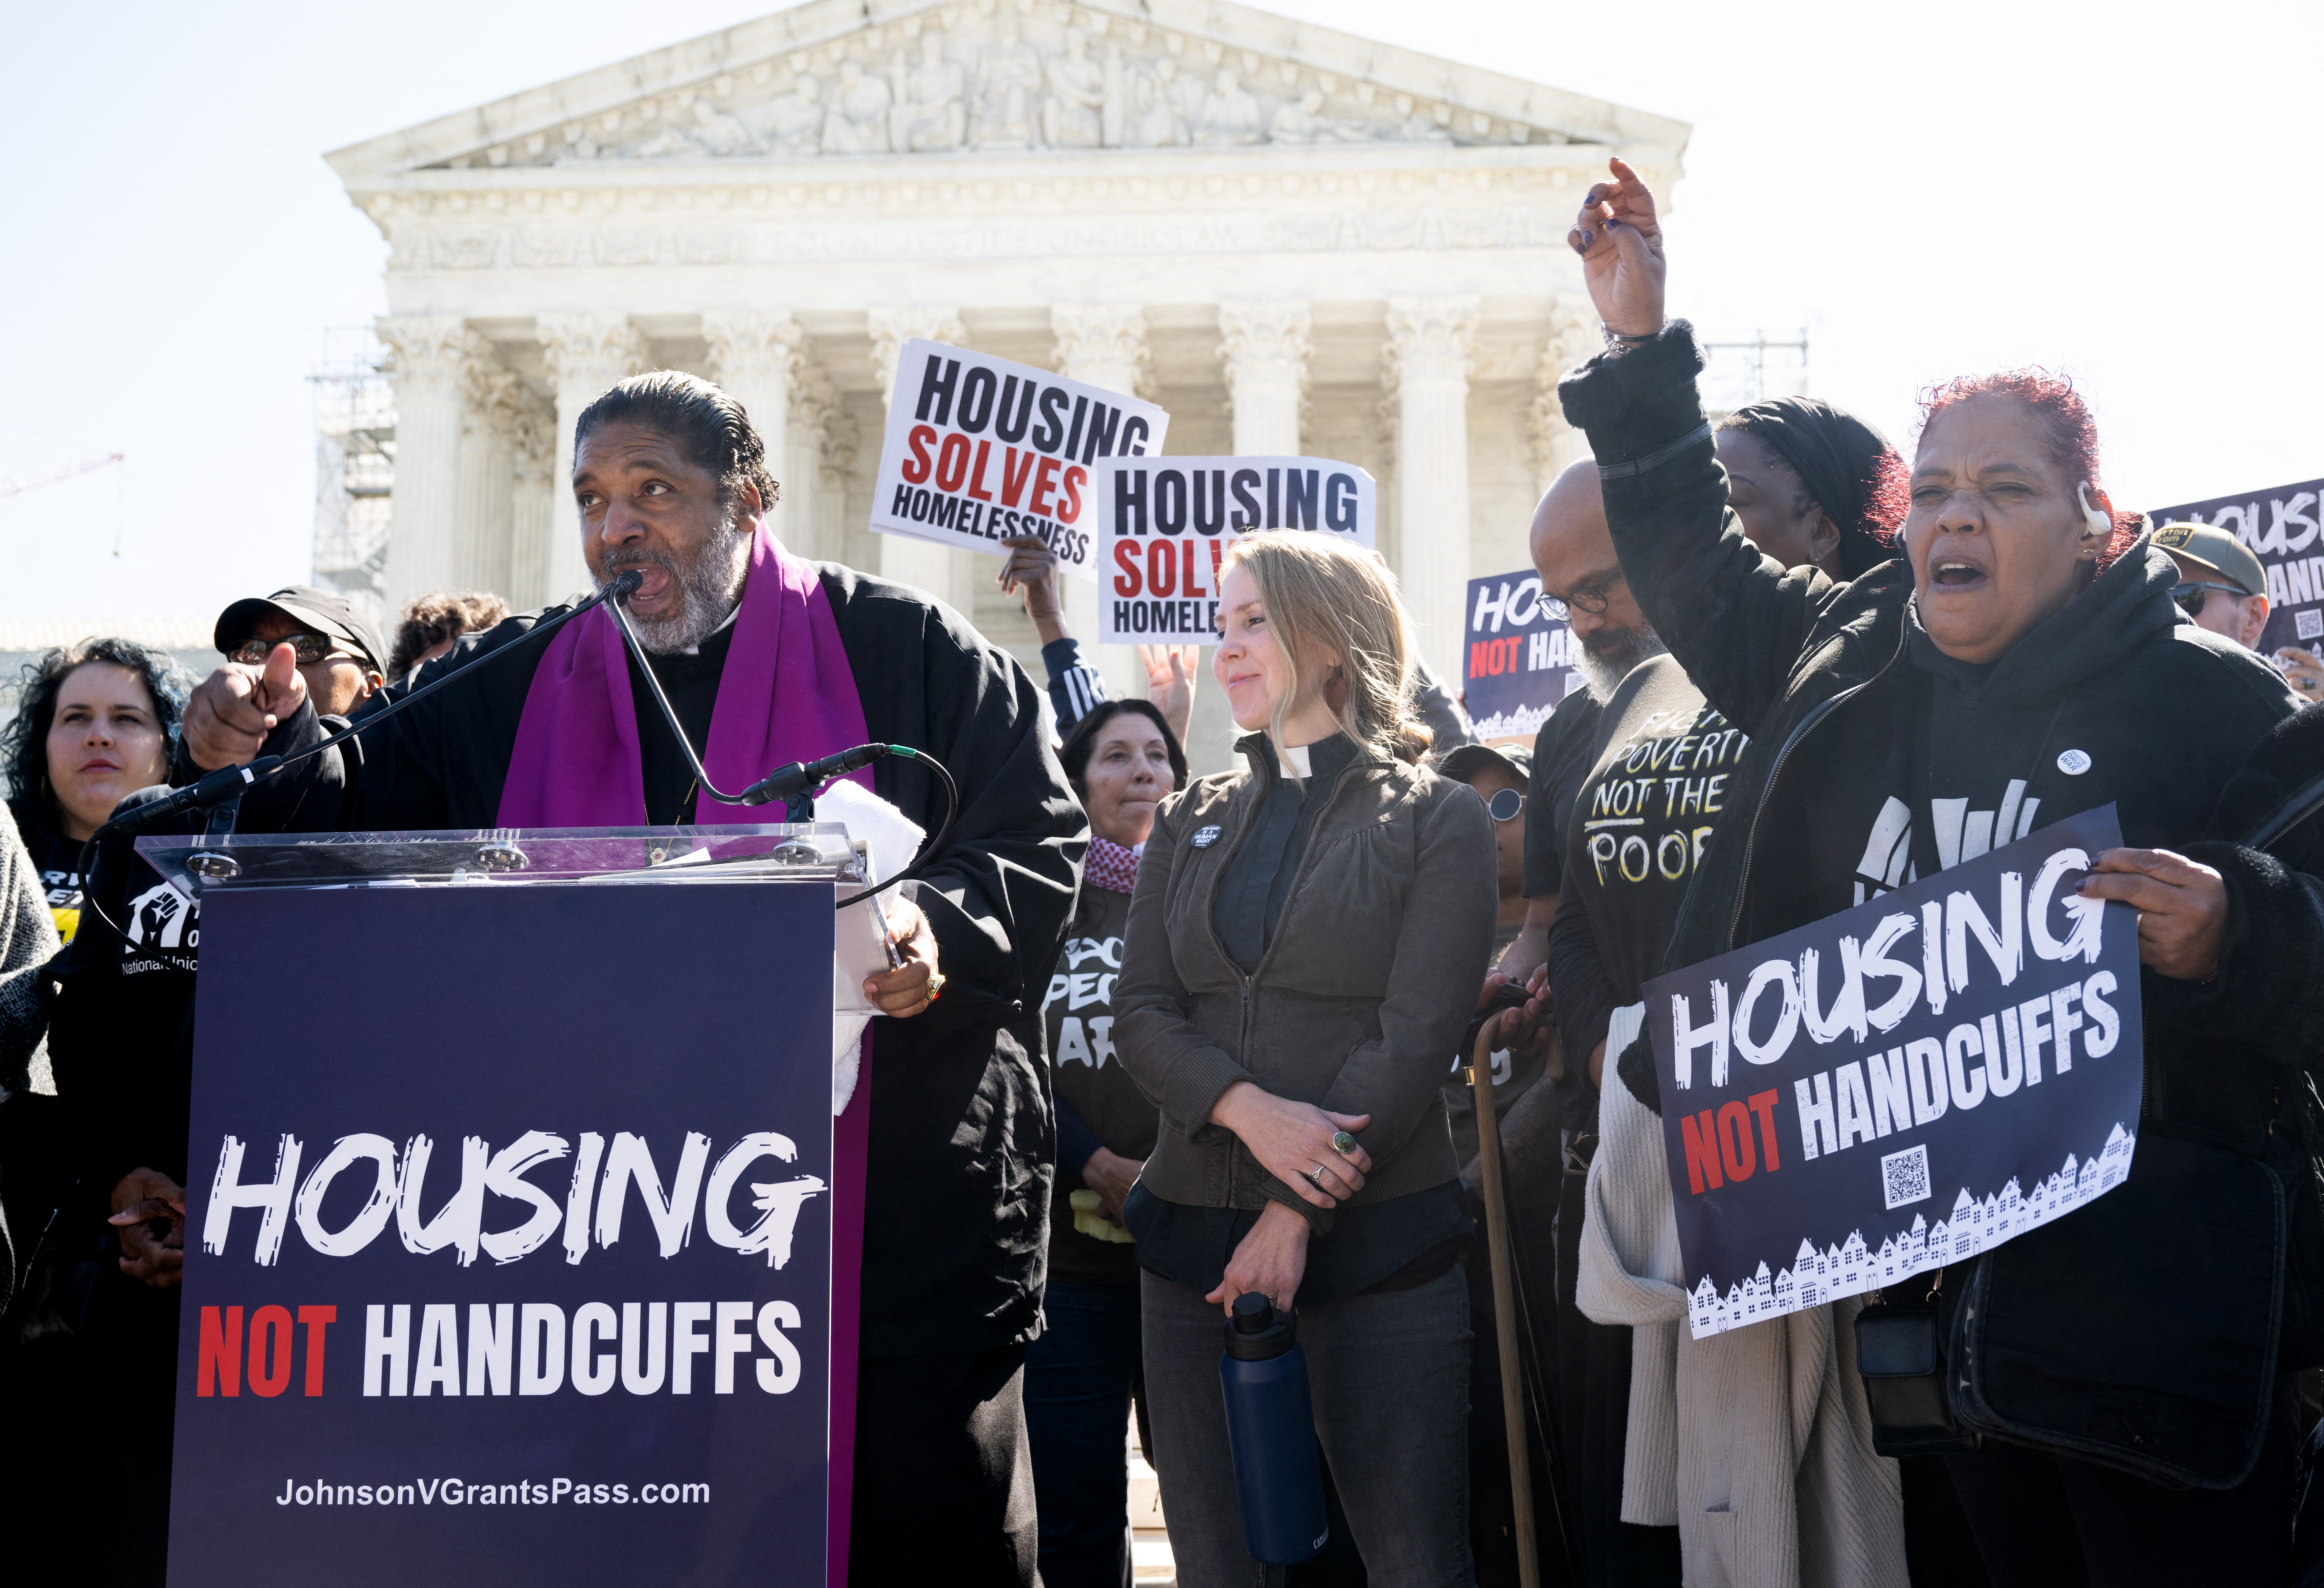 protest outside us supreme court building over homelessness crackdown